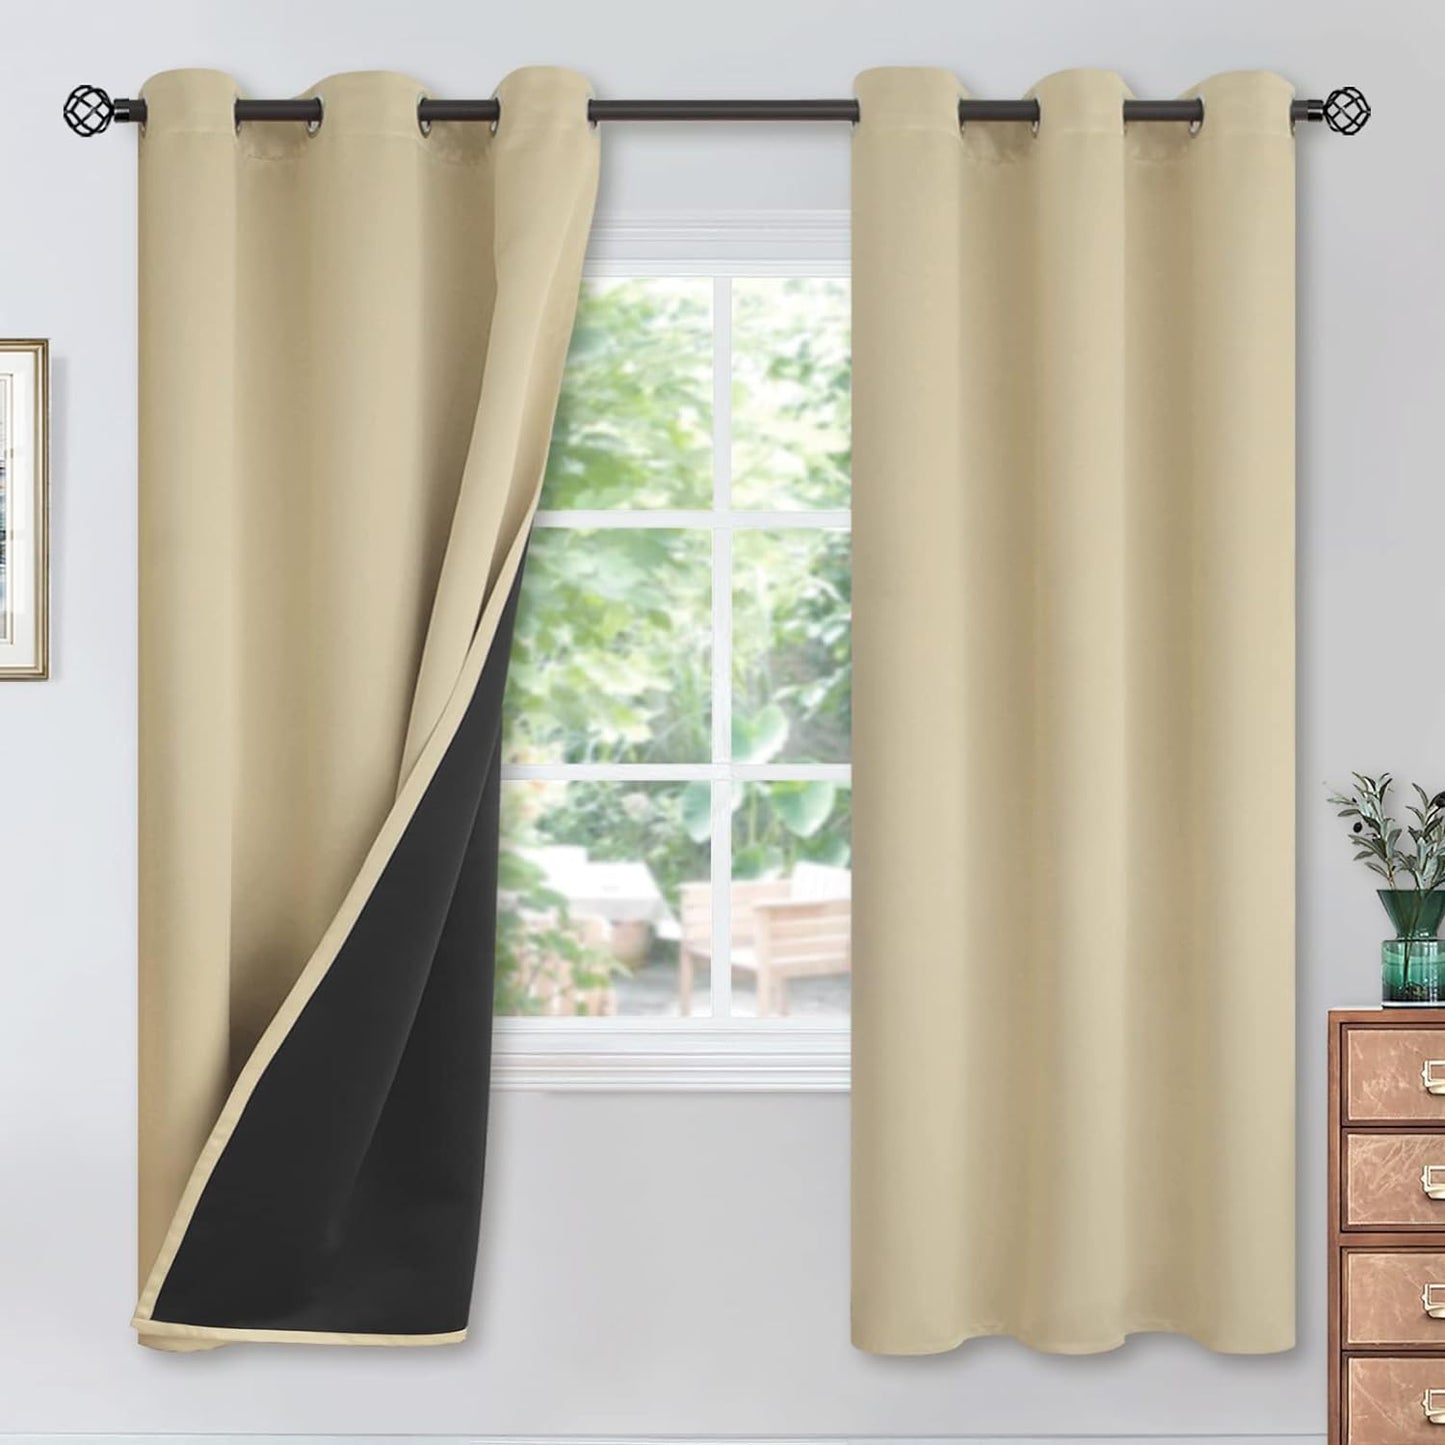 Youngstex Black 100% Blackout Curtains 63 Inches for Bedroom Thermal Insulated Total Room Darkening Curtains for Living Room Window with Black Back Grommet, 2 Panels, 42 X 63 Inch  YoungsTex Beige 42W X 72L 